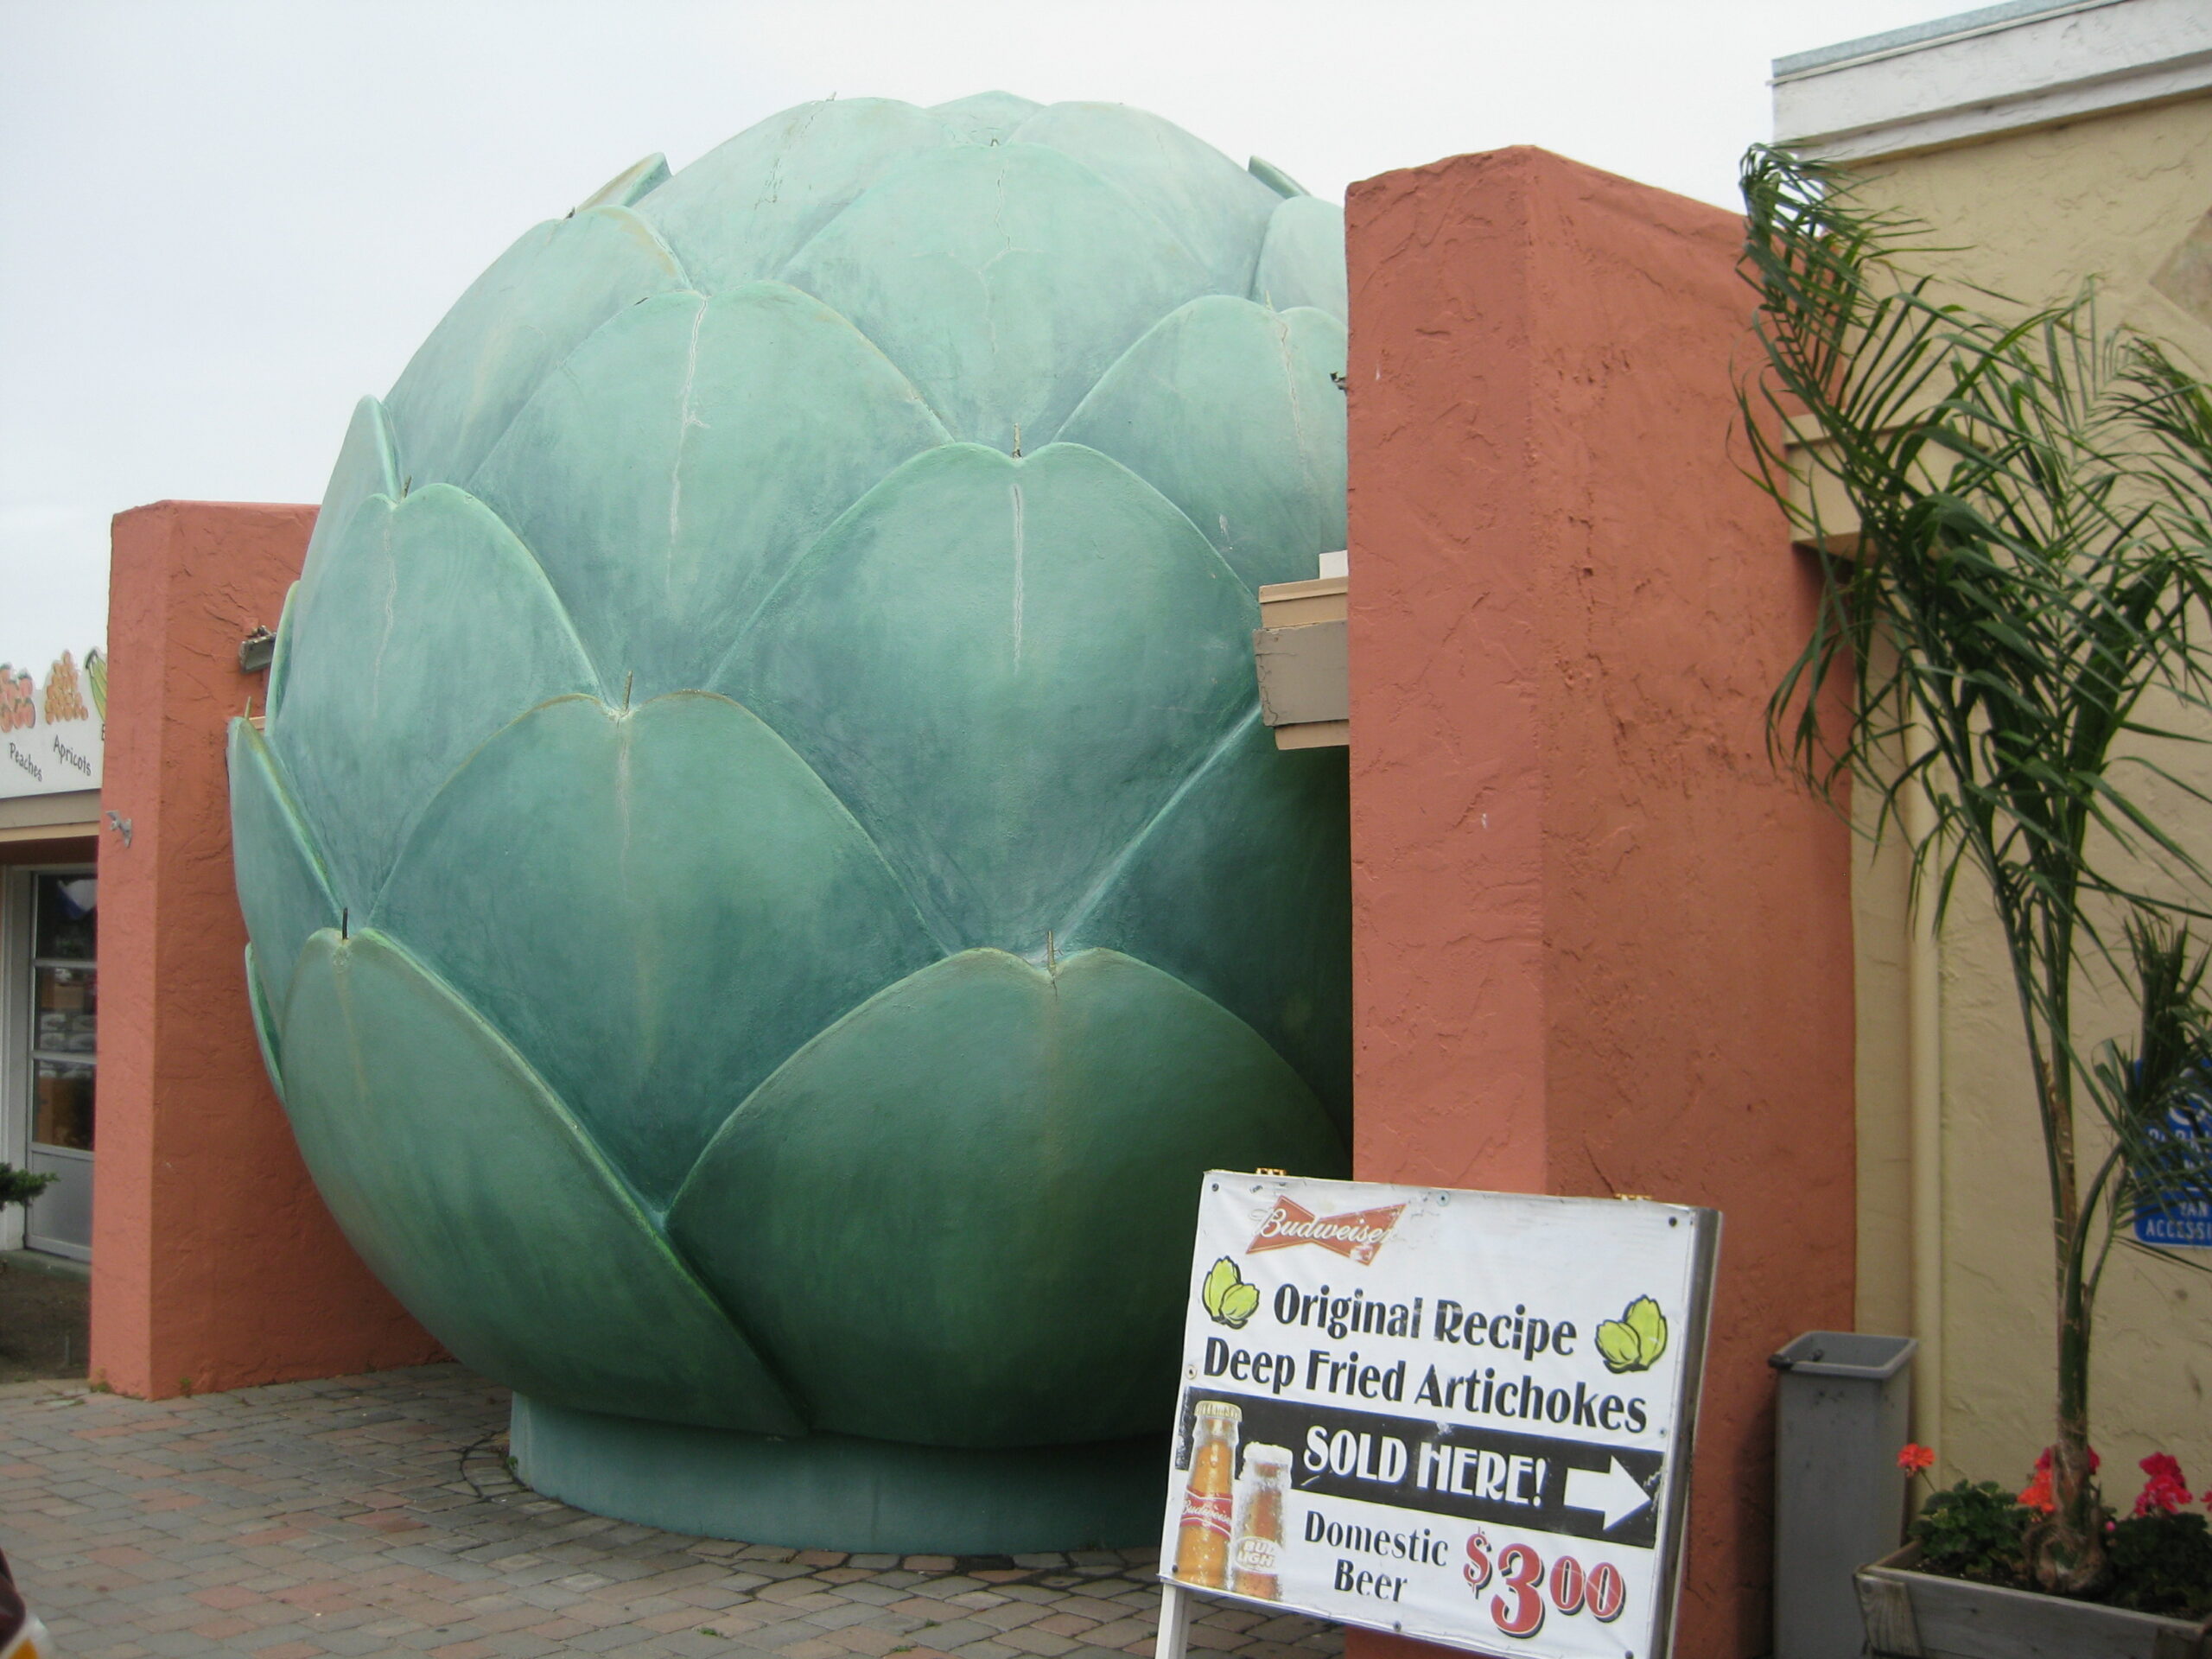 A sculpture of an artichoke sits outside the World Famous Giant Artichoke Family Restaurant in Castroville, California.